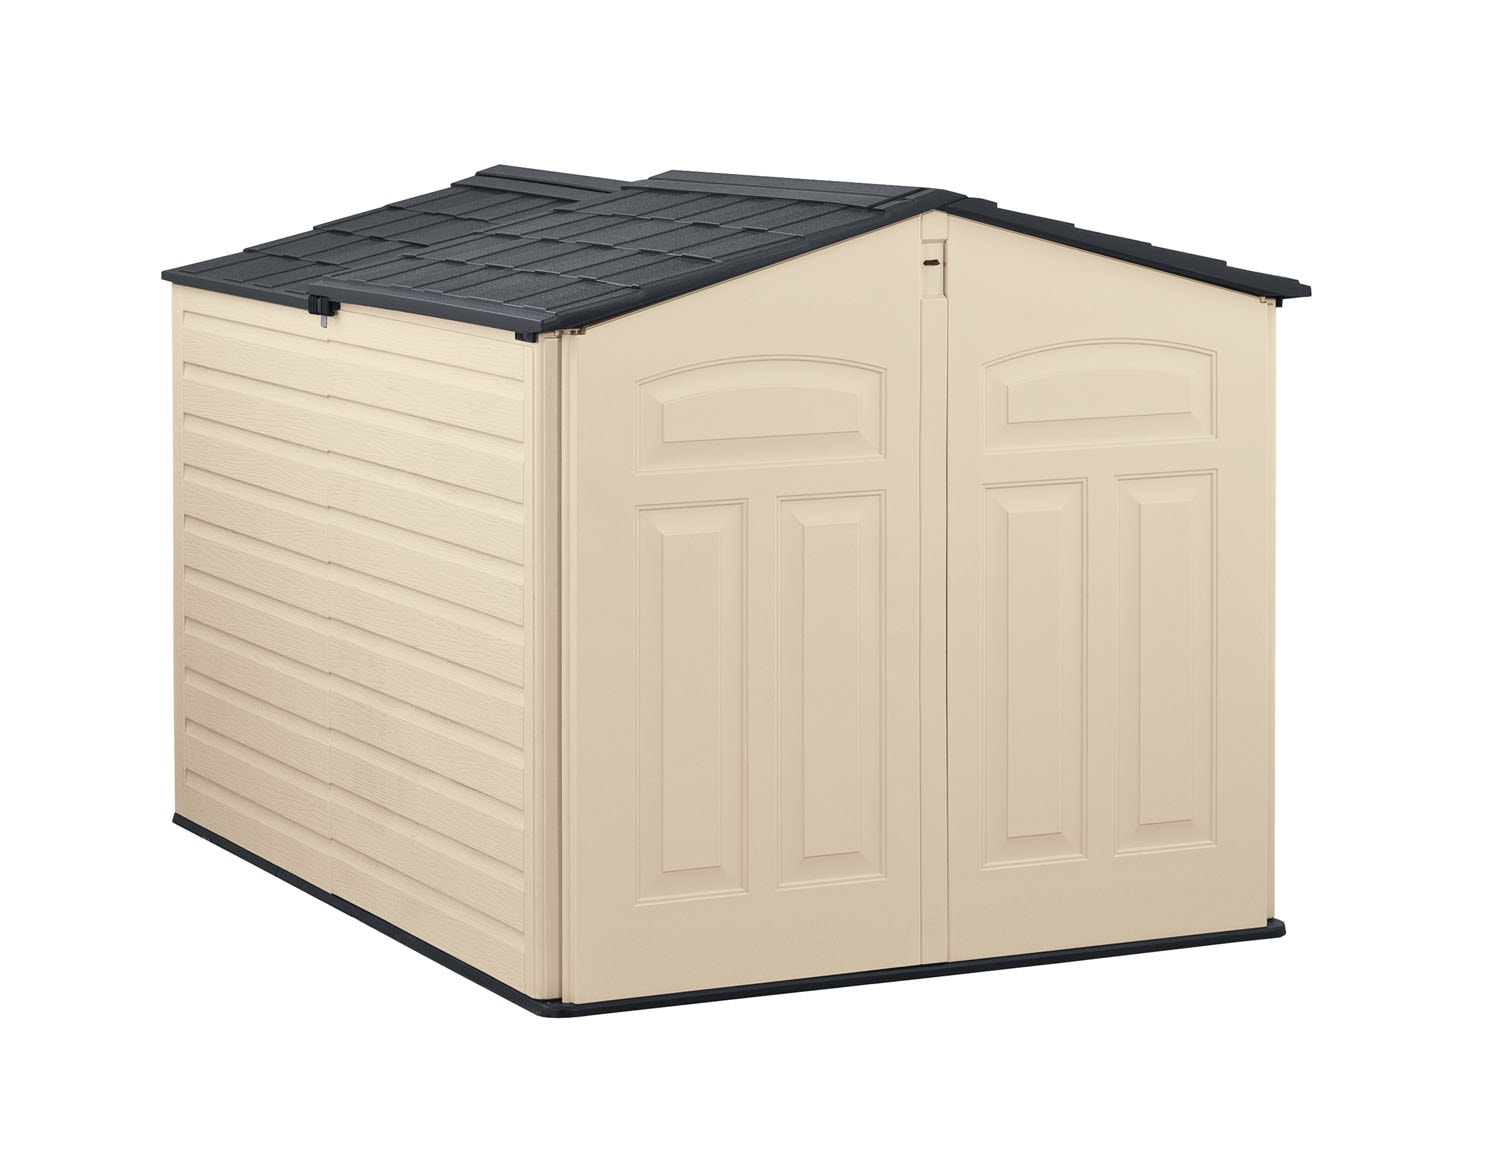 Rubbermaid 5x4 Ft Resin Weatherproof Outdoor Storage Shed, Canteen  Brown/Putty, 1 Piece - King Soopers